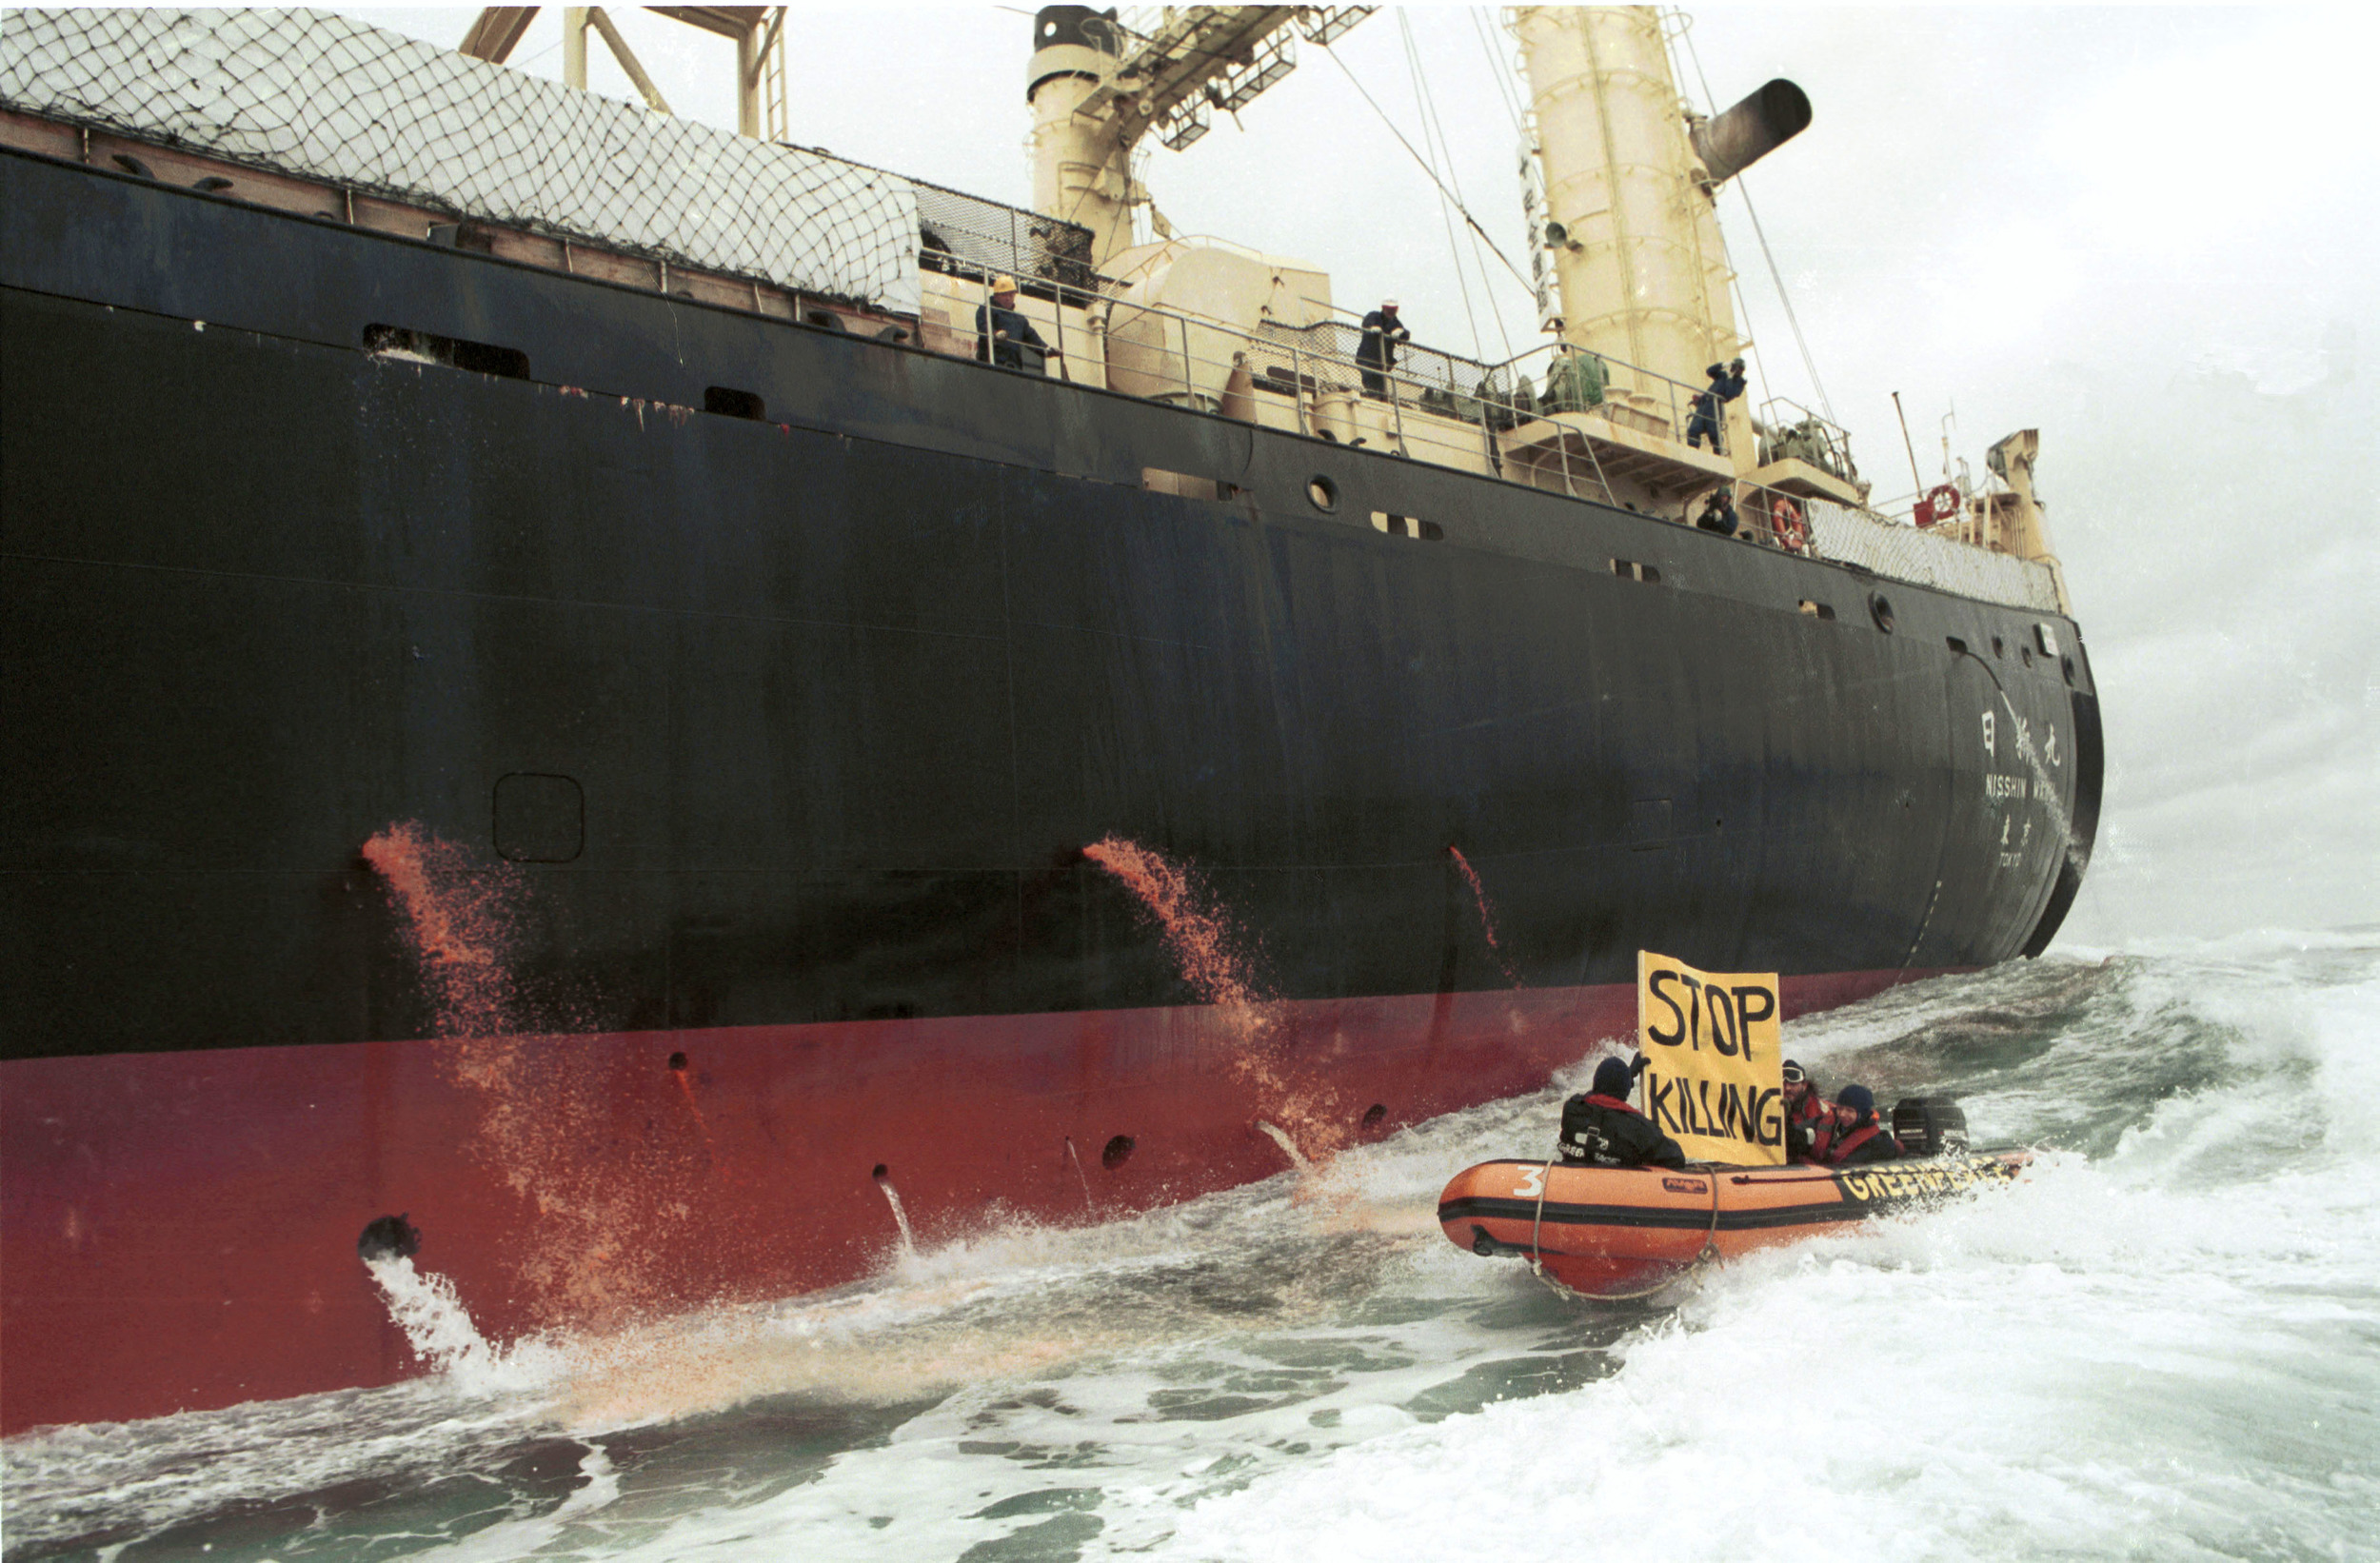 A large whaling boat with steams of red liquid coming out the side. A small protest boat alongside holds the banner "Stop killing"